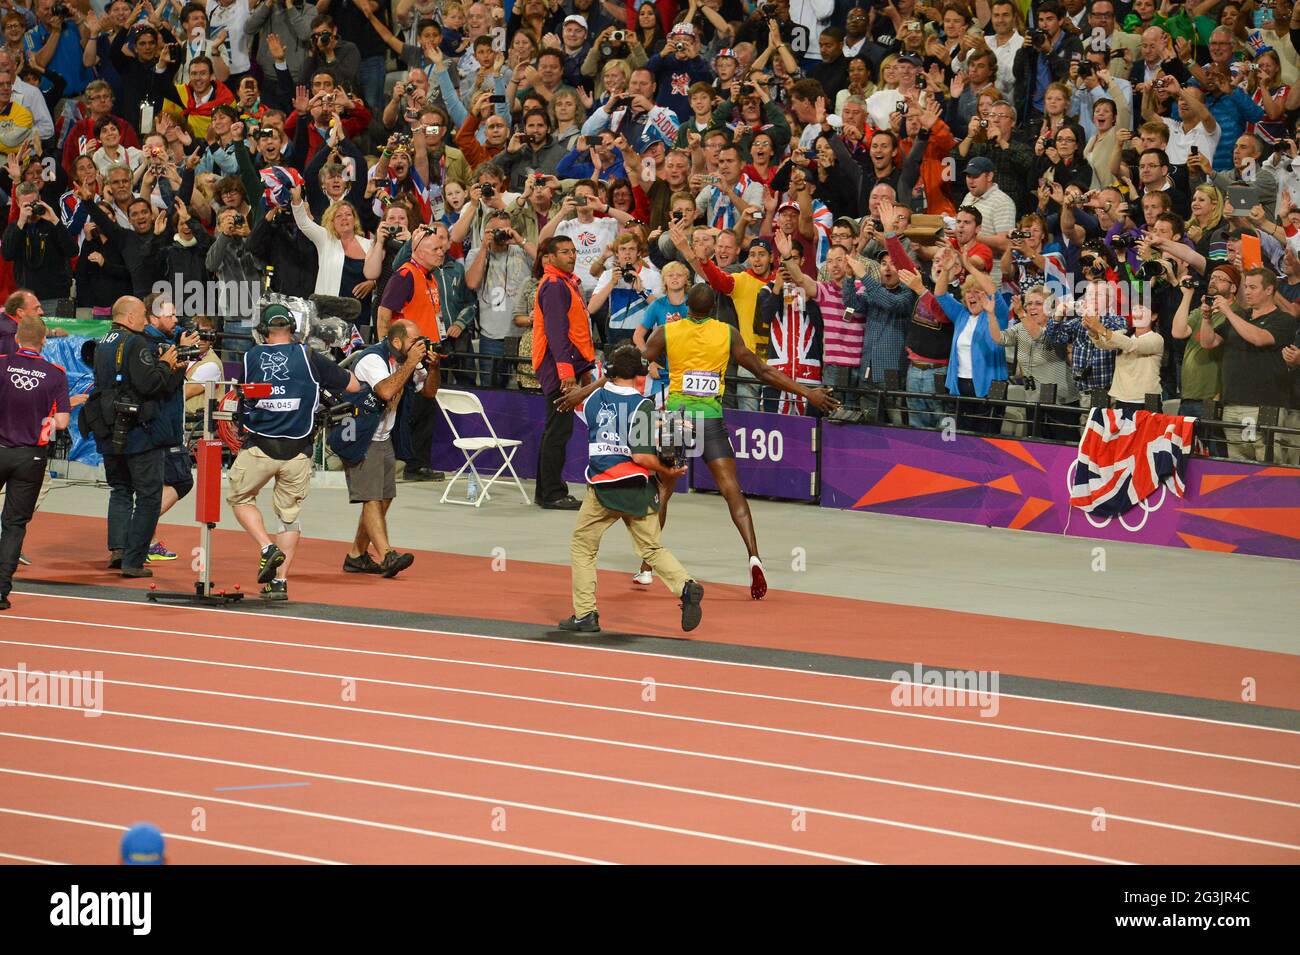 LONDON, ENGLAND - AUGUST 5,  during the evening session of athletics at the Olympic Stadium  on August 5, 2012 in London, England Photo by Roger Sedres / Gallo Images Stock Photo